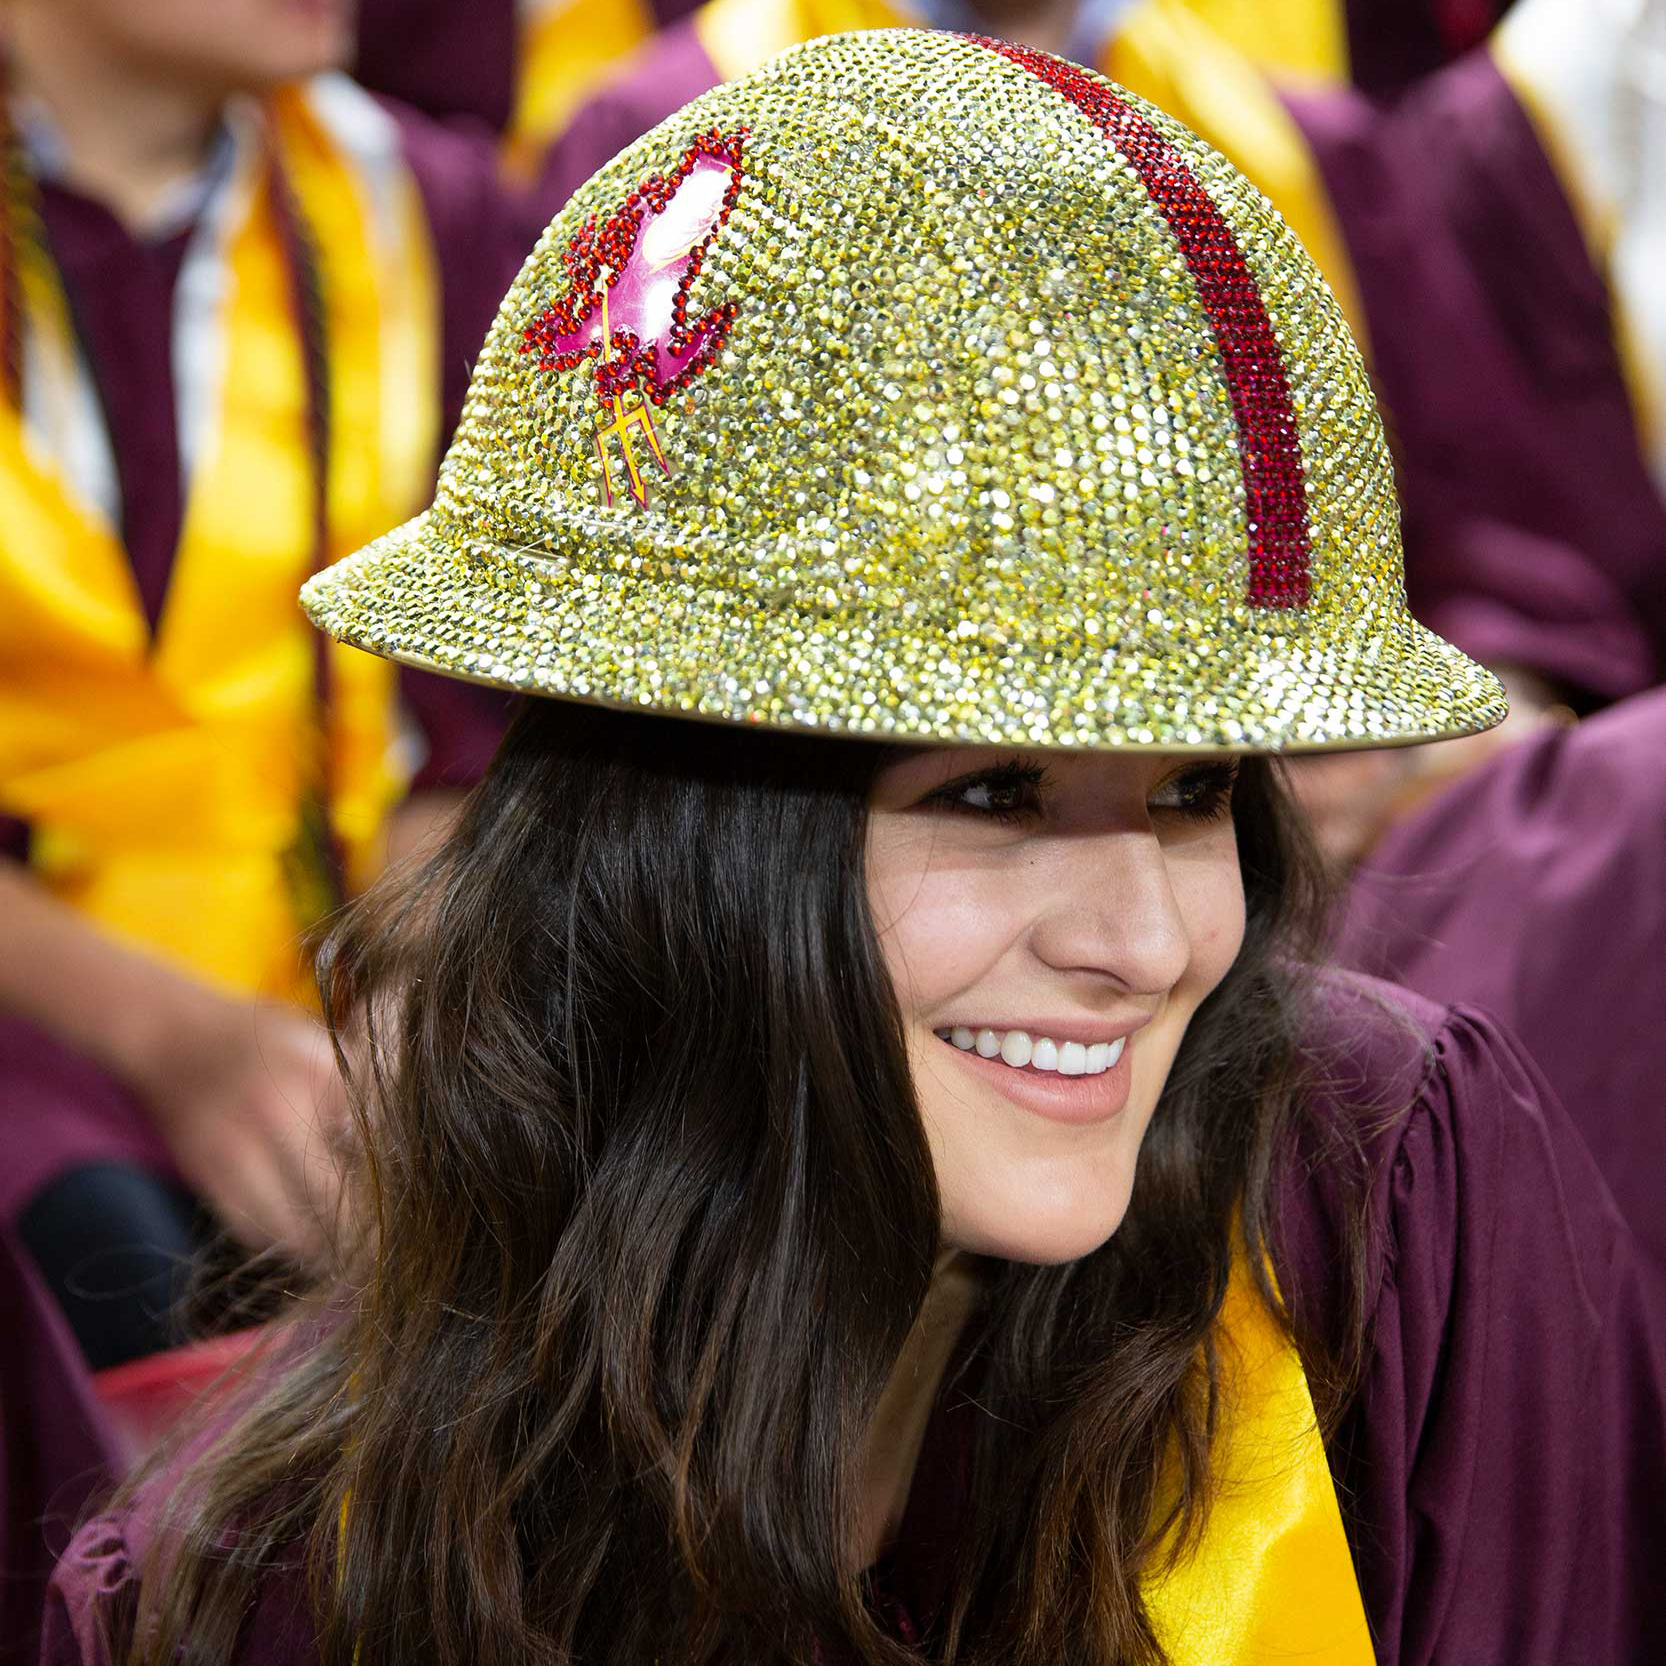 A construction graduate smiles as she shows off her bedazzled ASU hard hat